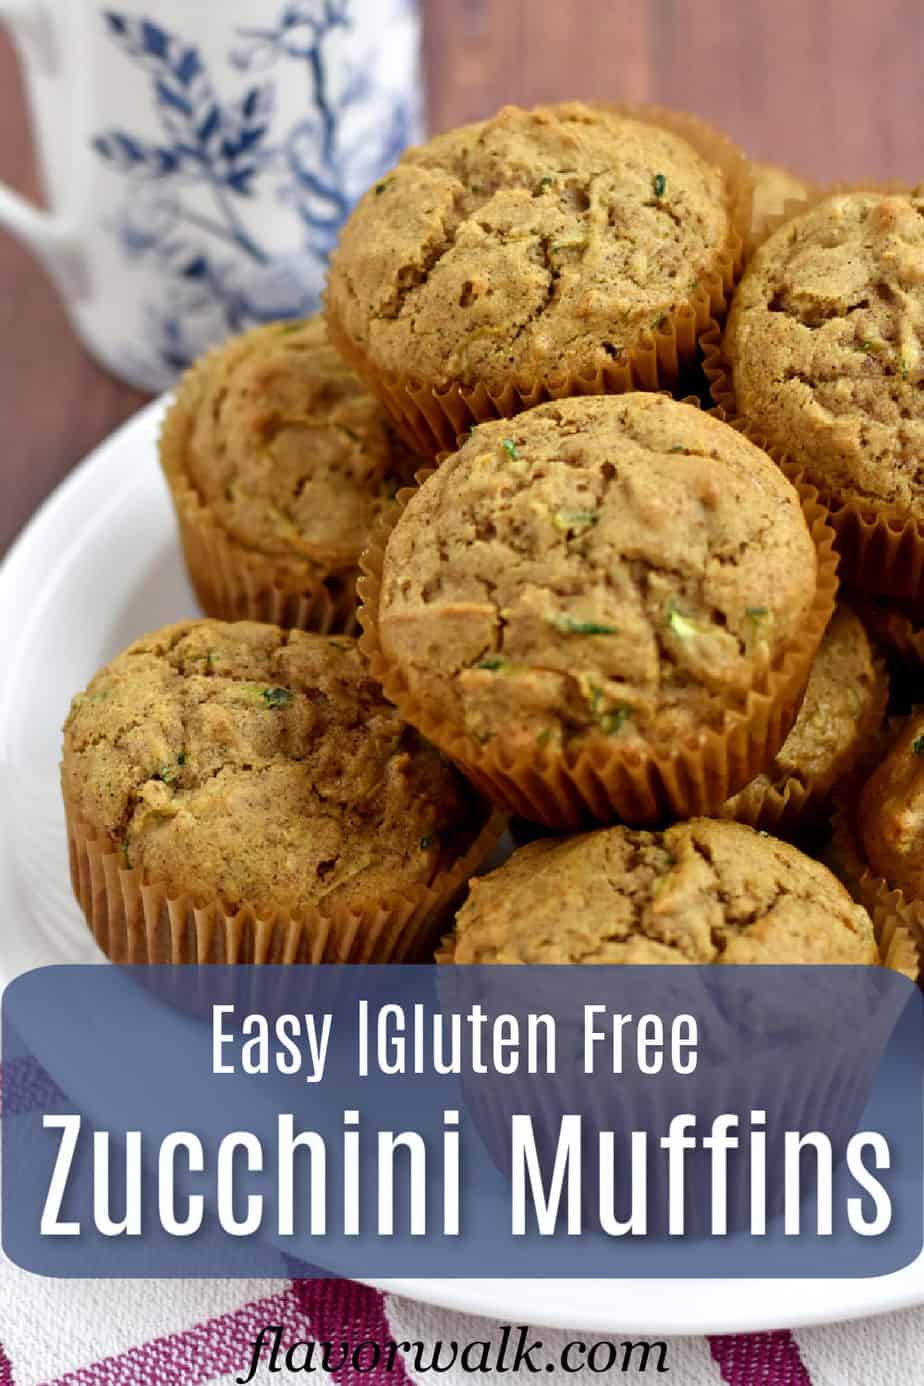 A stack of gluten free zucchini muffins on a round white plate with a blue and white text overlay.